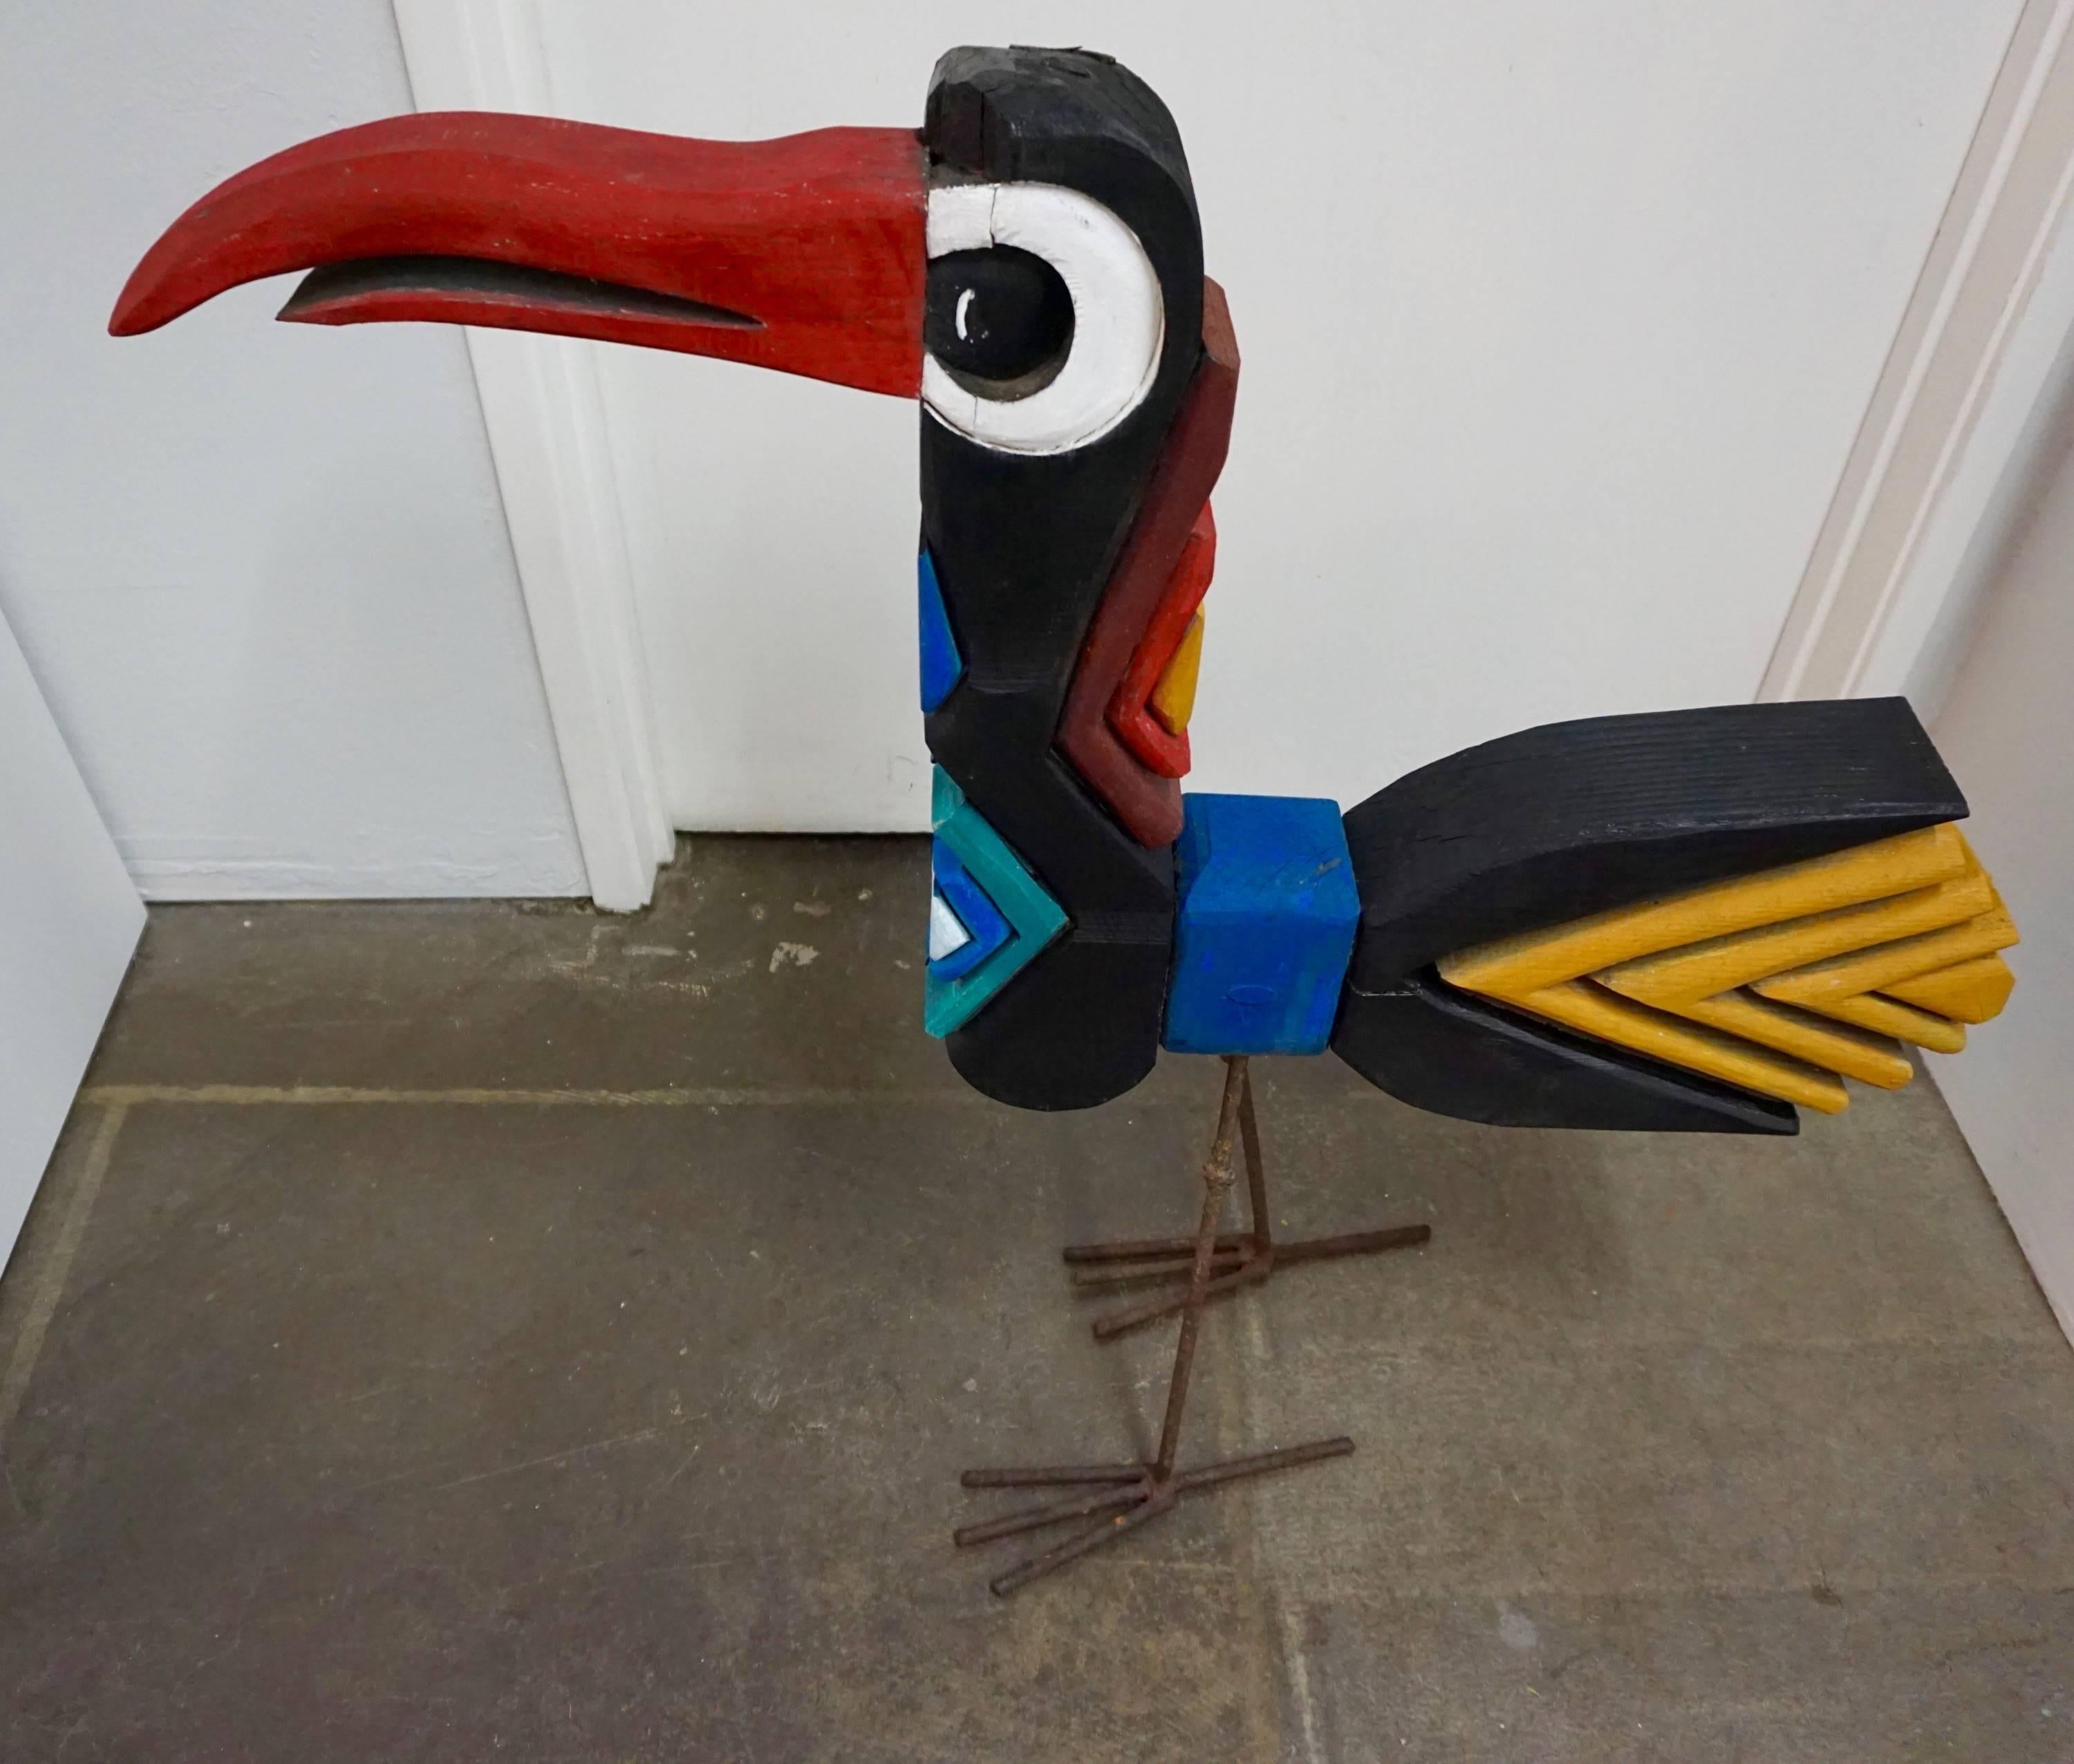 Sculpted from recycled wood, brightly painted, with welded rebar legs.